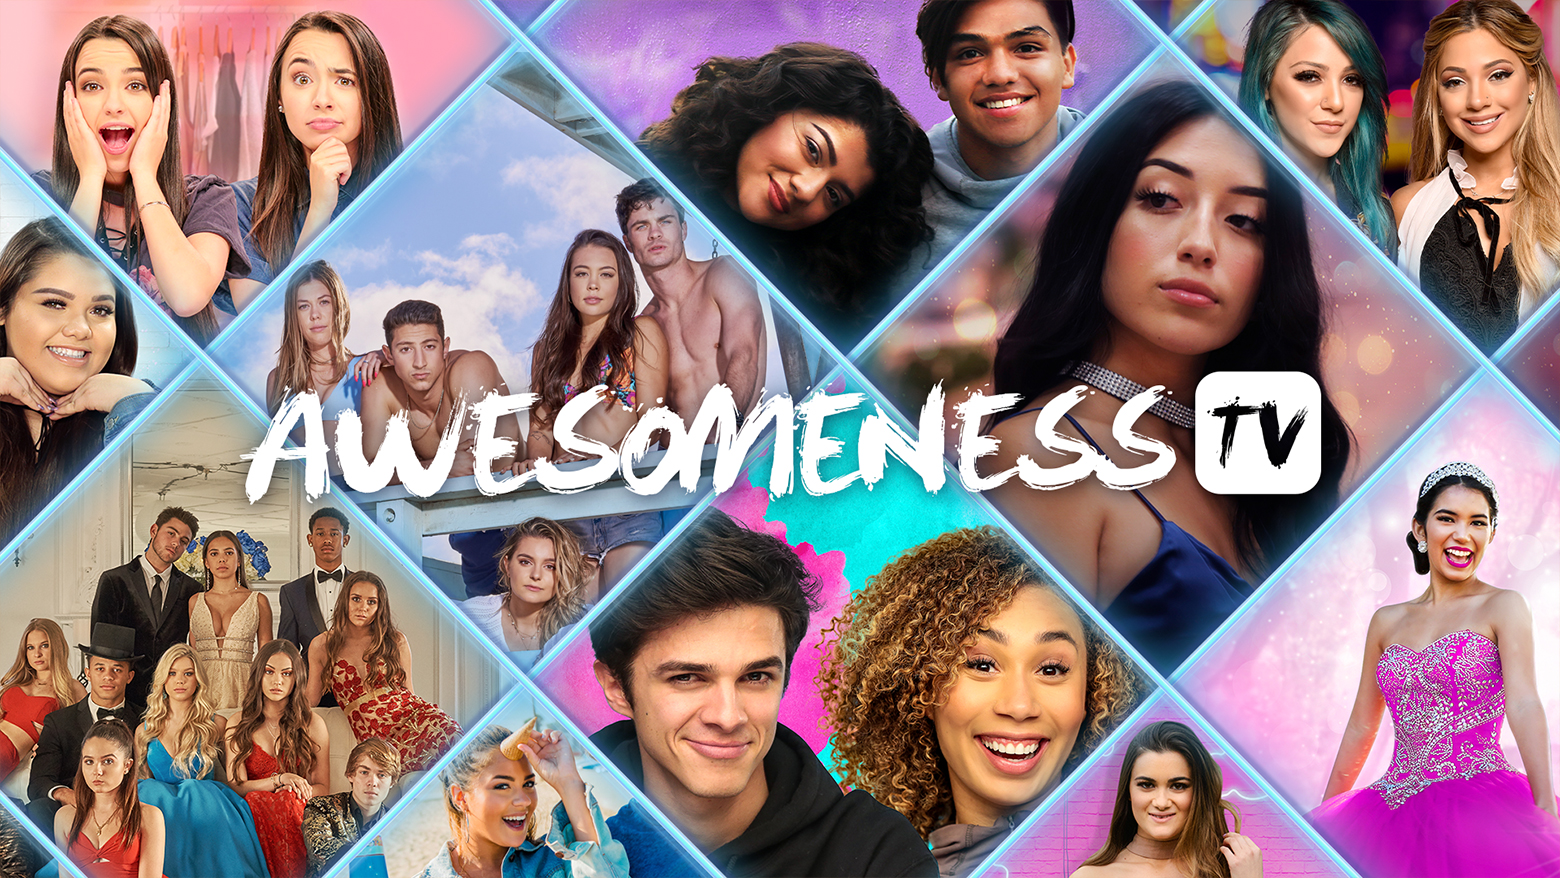 Pluto TV’s Awesomeness TV Channel Gets a Back to School Update